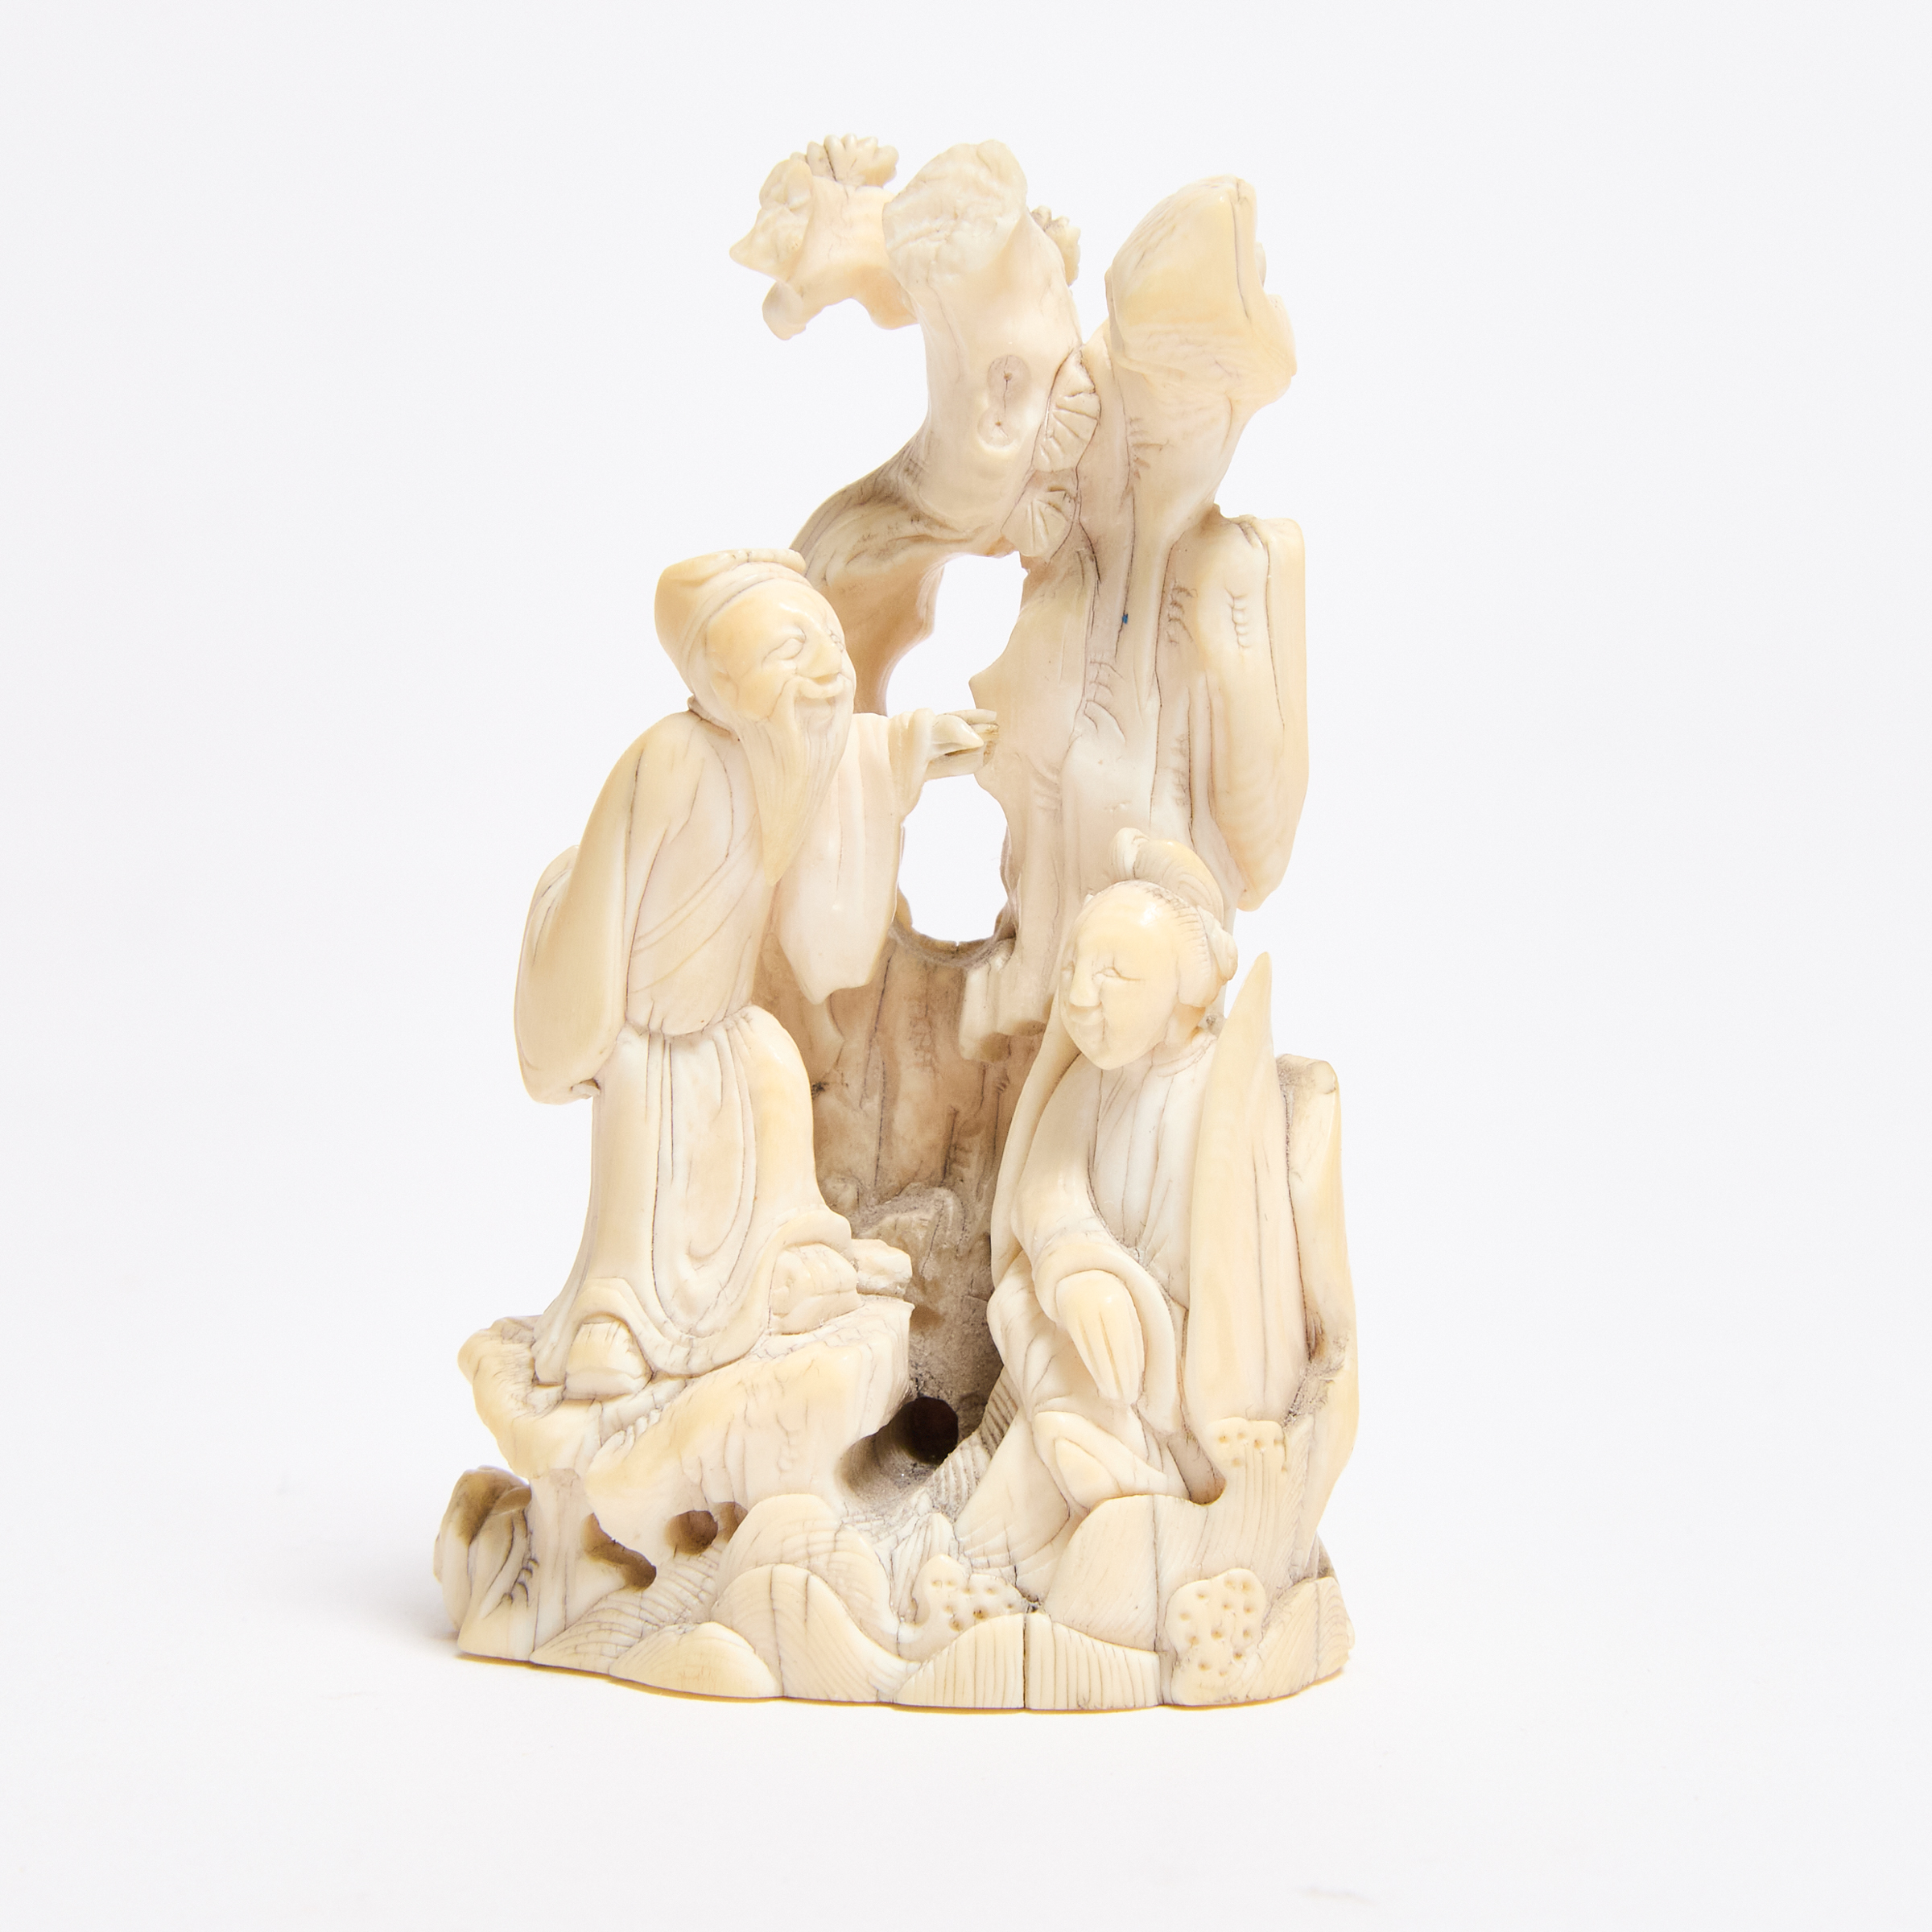 A Small Ivory Figural Group, 18th